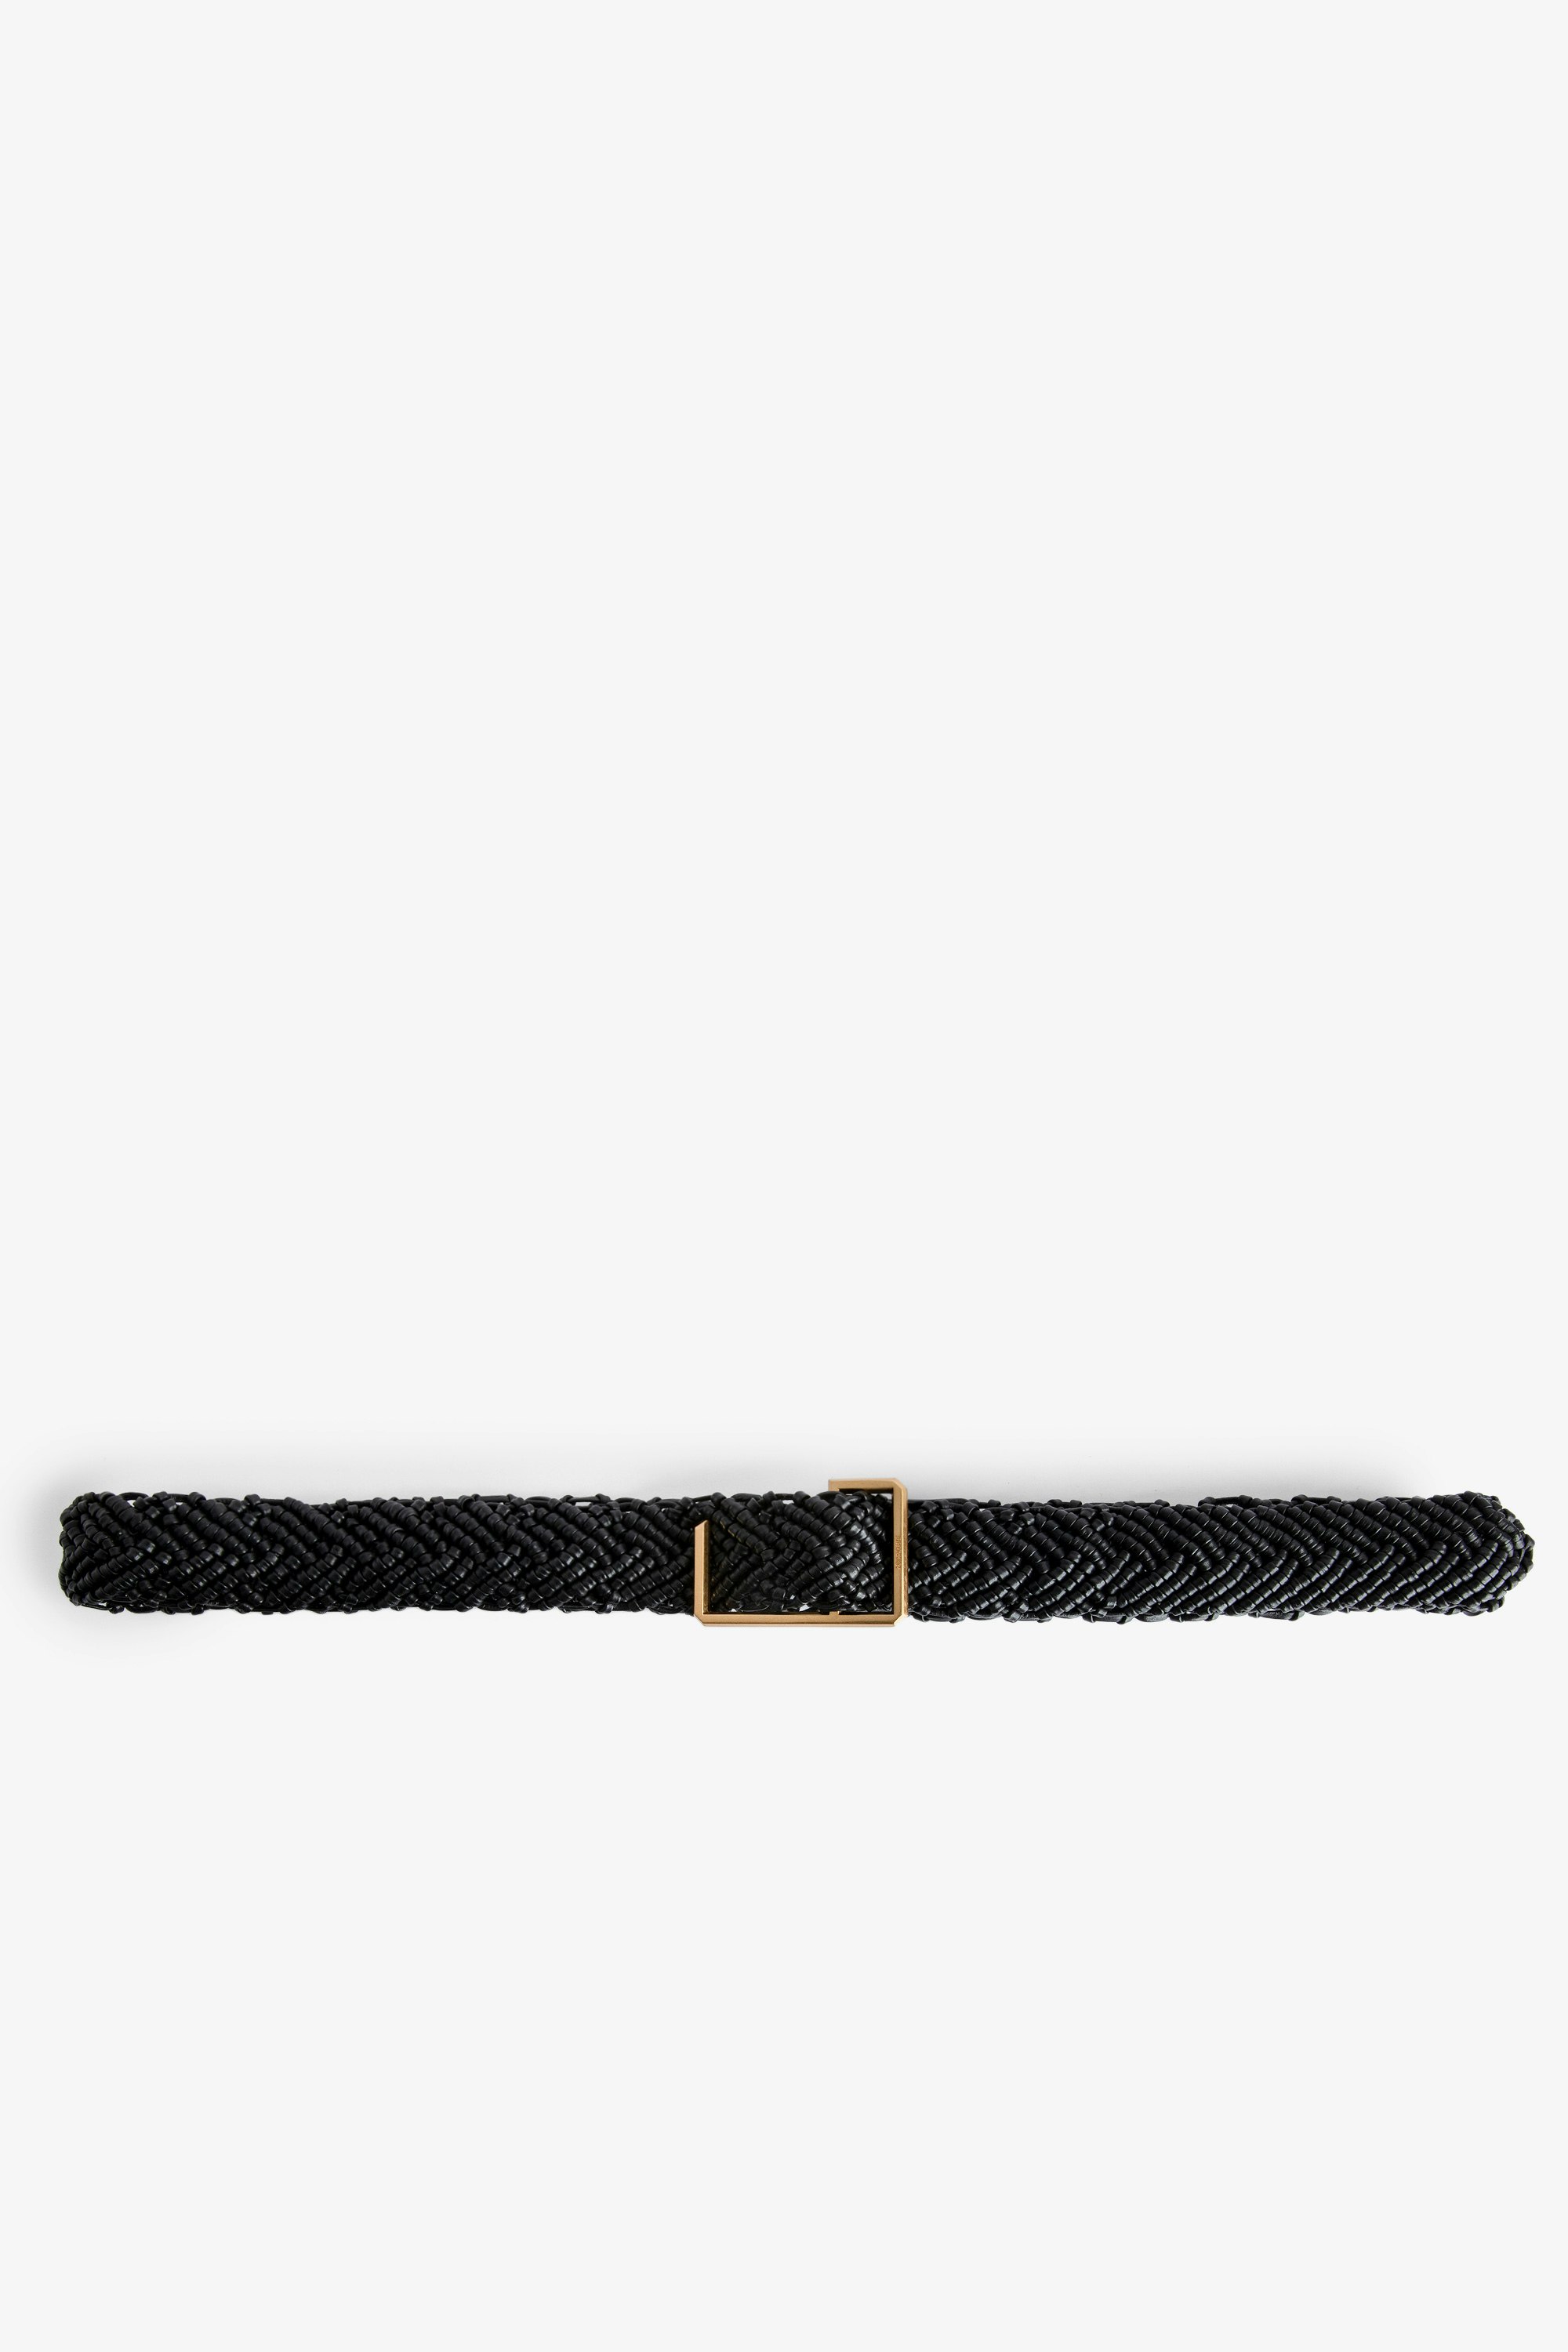 La Cecilia Obsession Belt - Adjustable black grained and braided leather belt with C buckle.